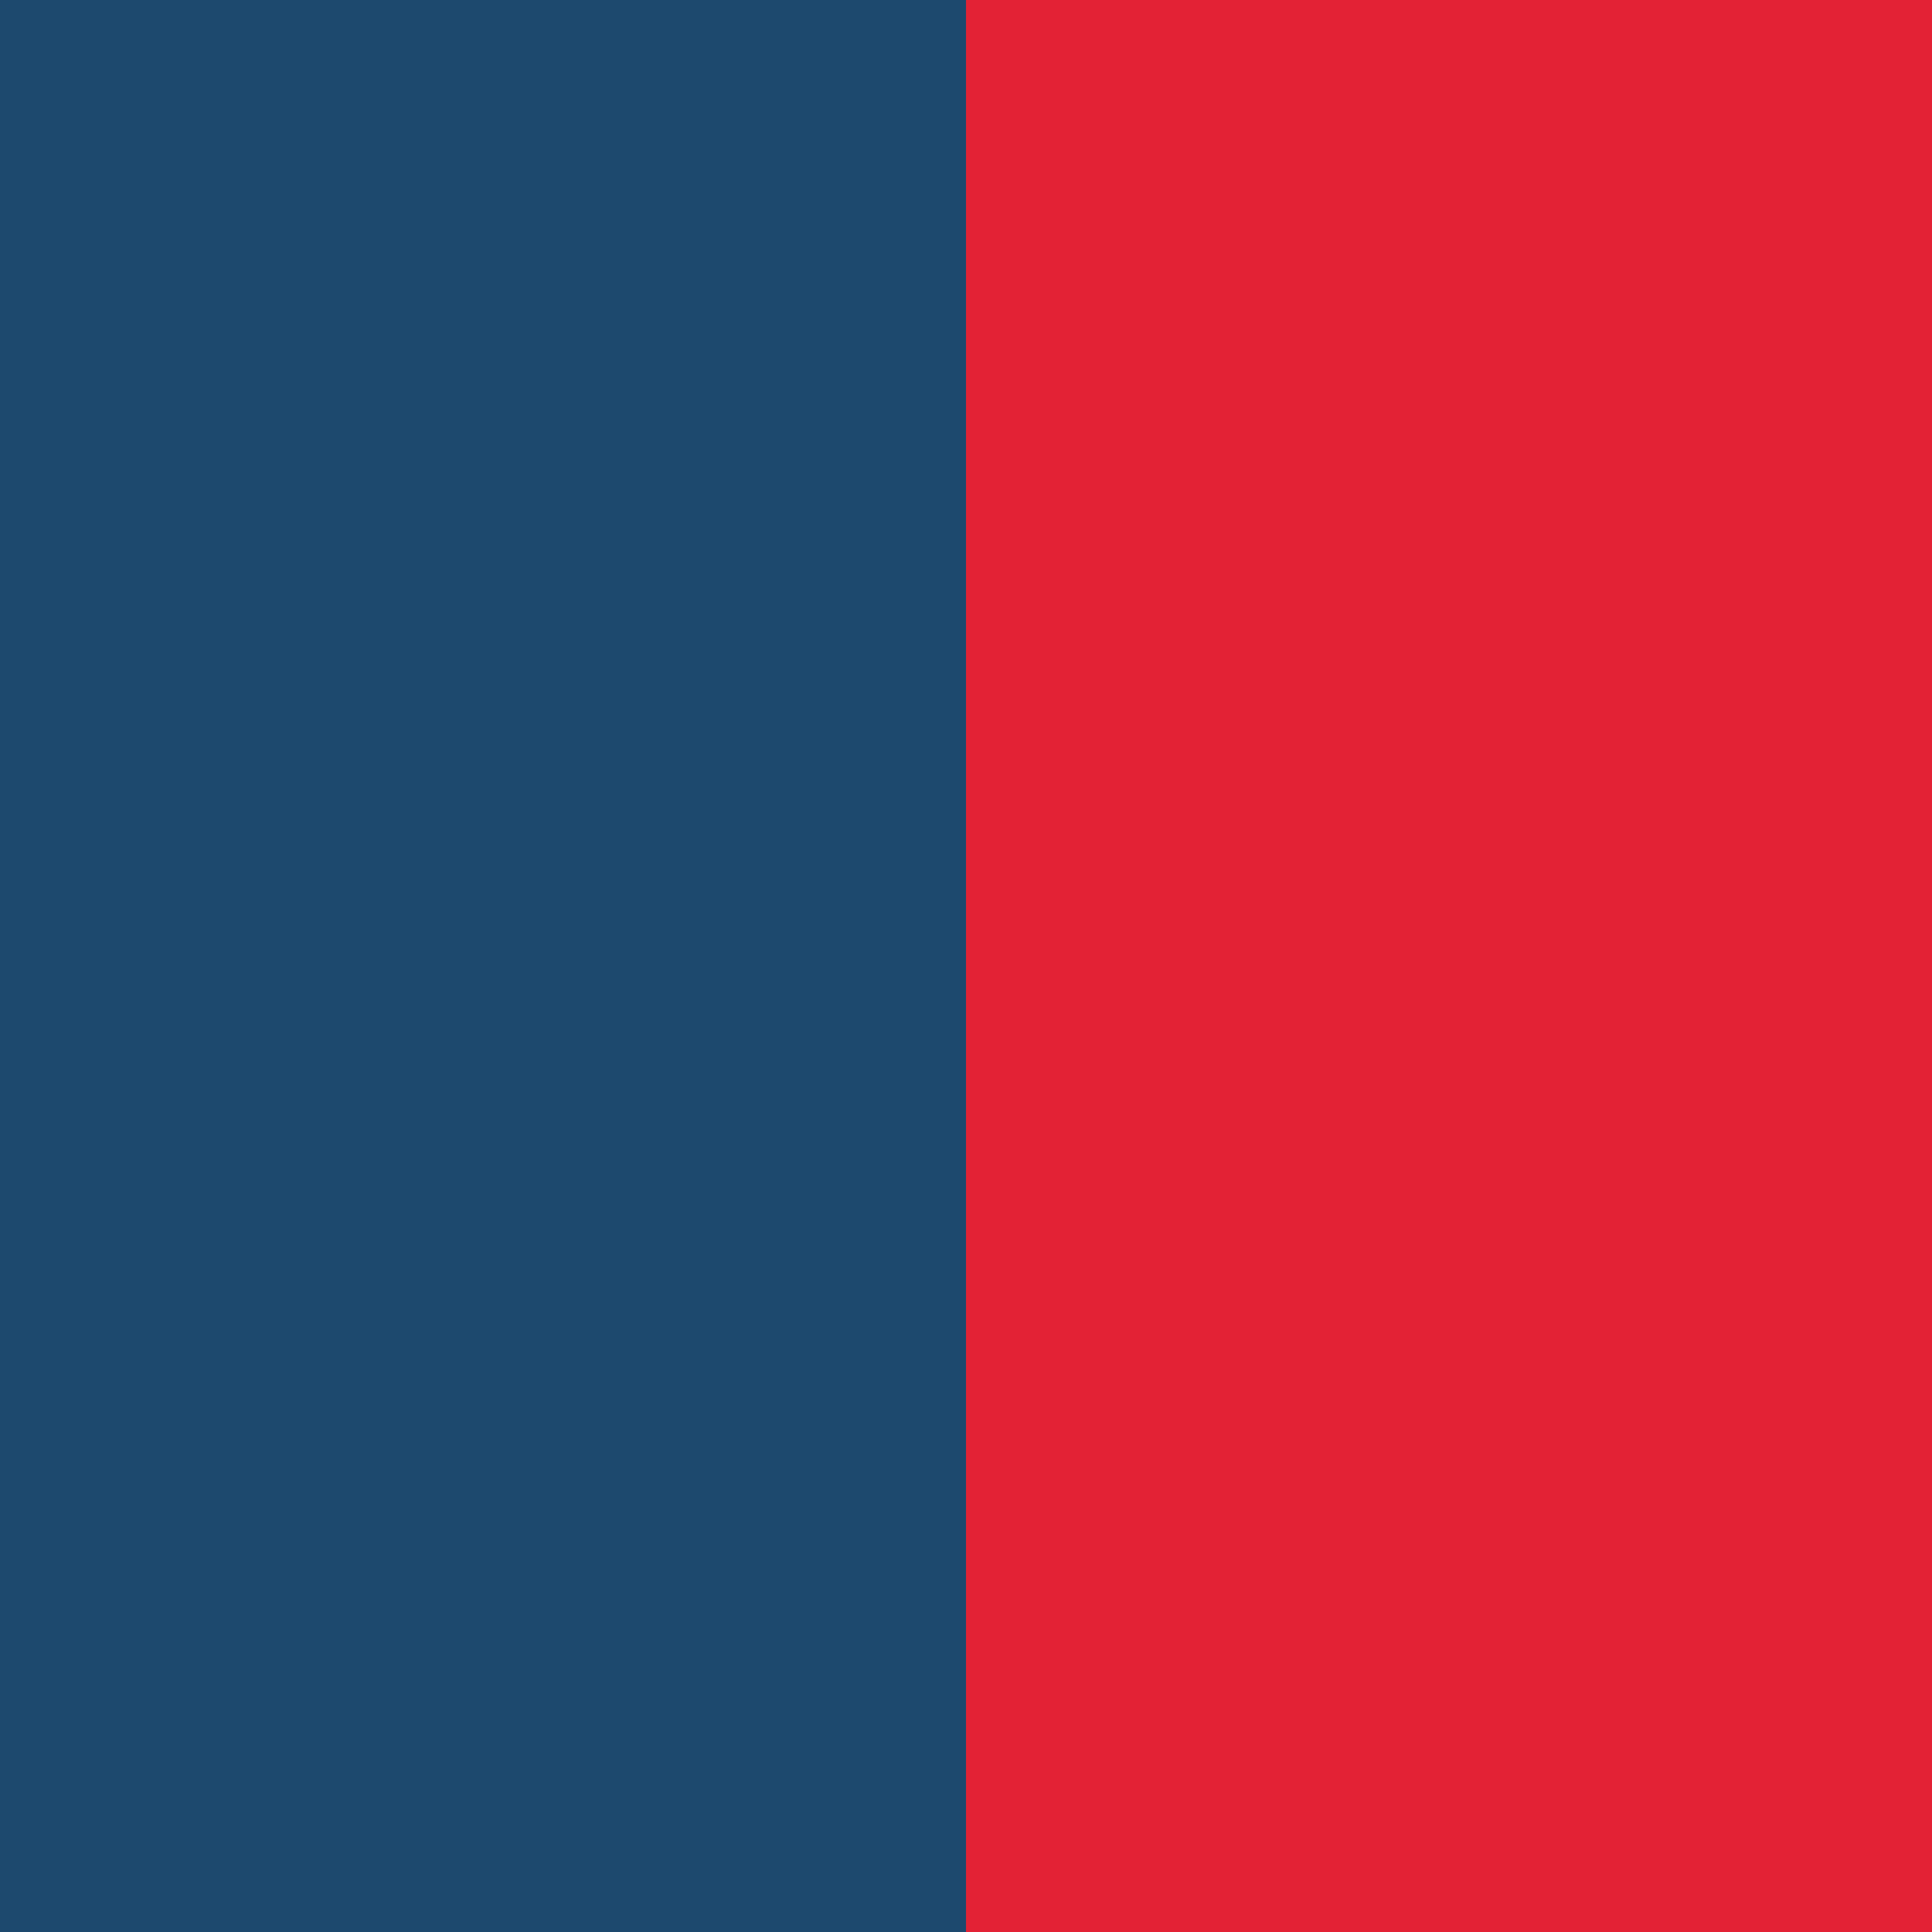 Blue & Red